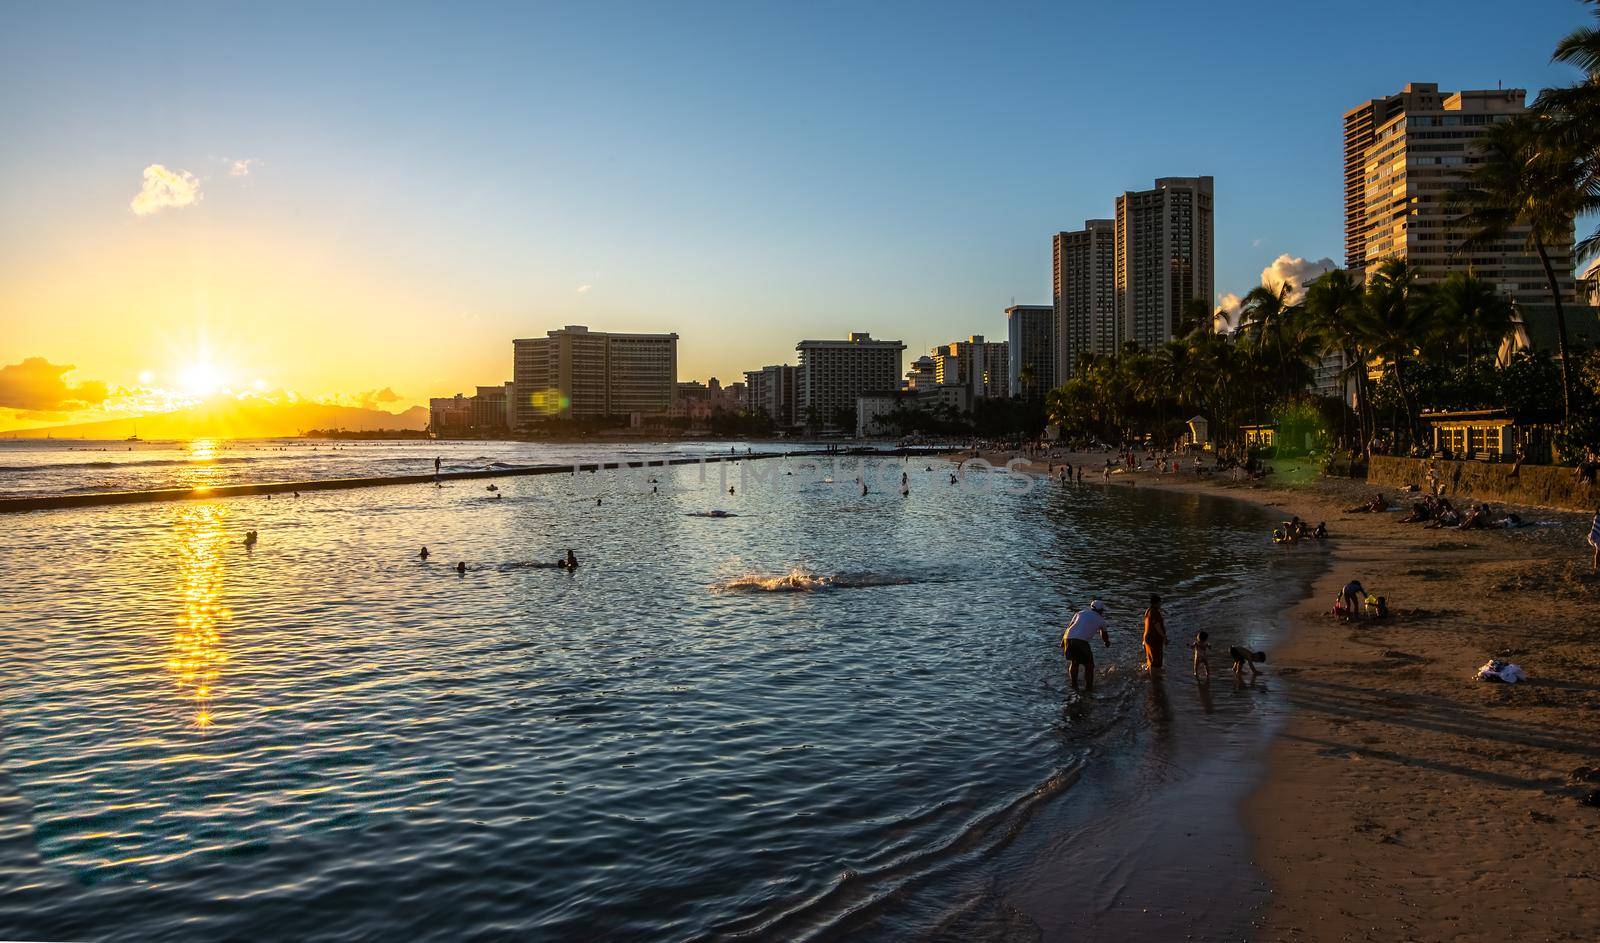 Ocean Water, Waikiki Beach, and Hotel Towers by digidreamgrafix